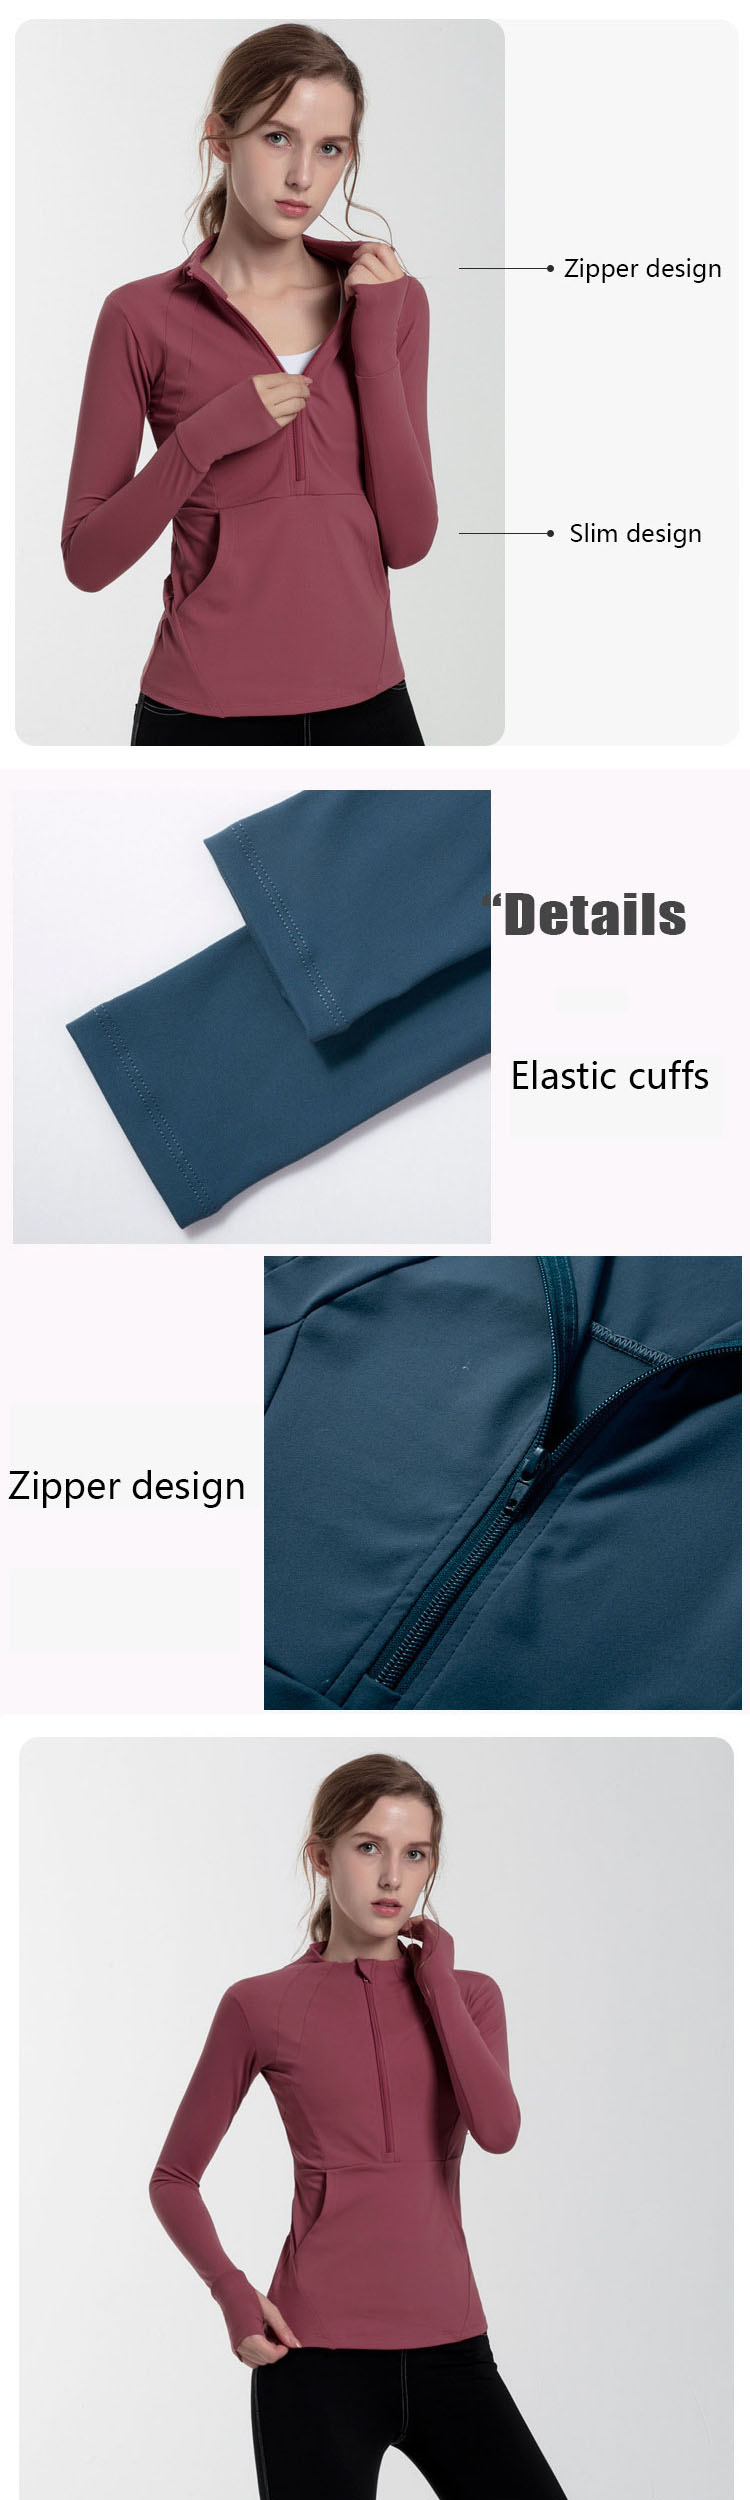 The zipper design is convenient to put on and take off, and exercise without burden.